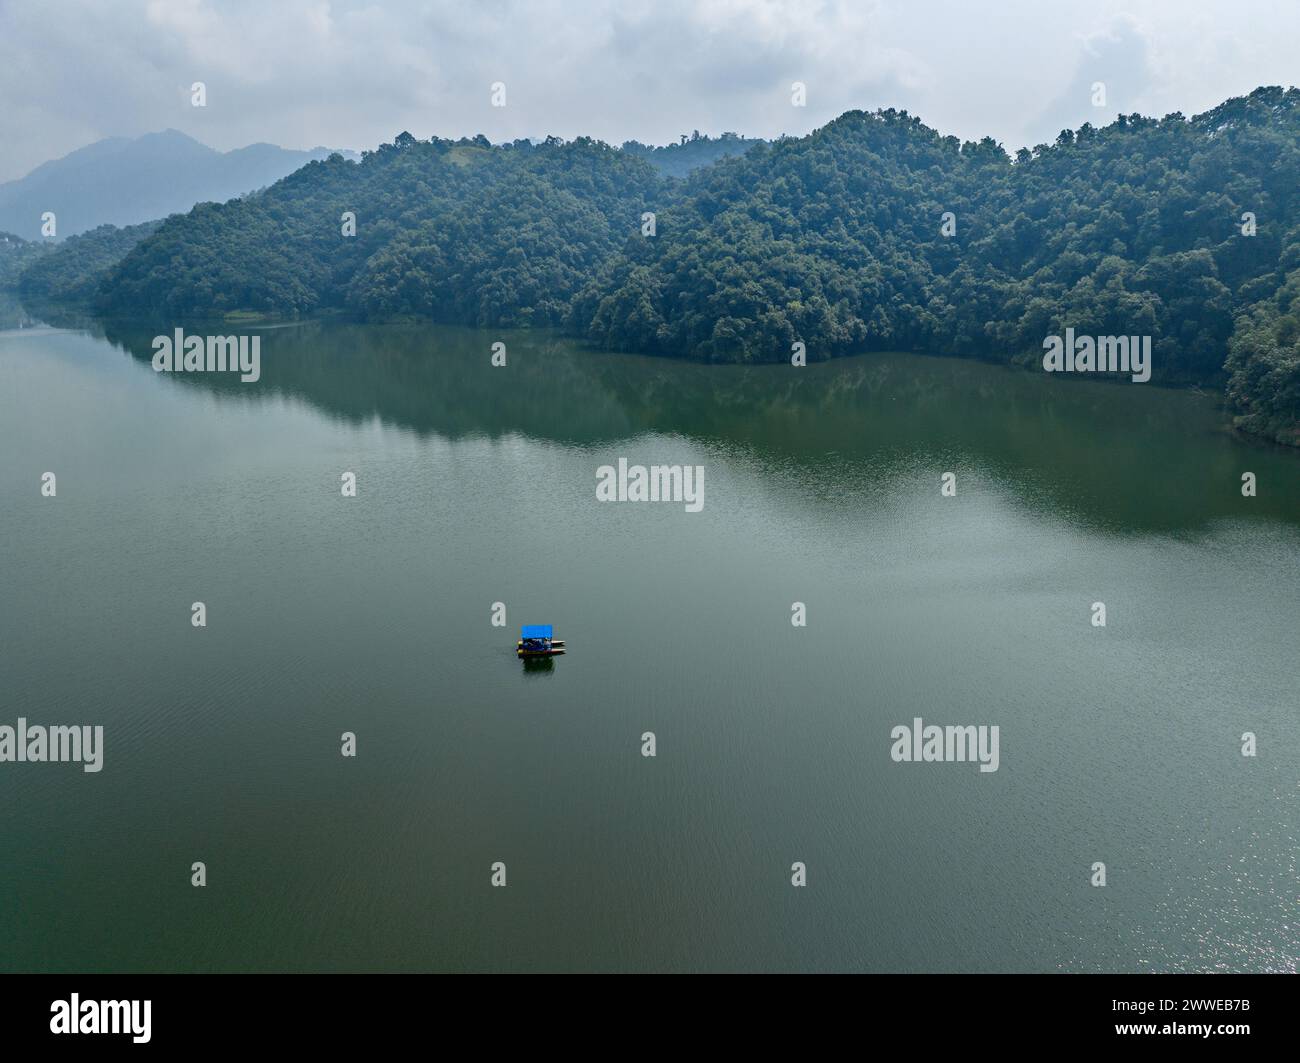 Aerial view of Begnas Lake the third largest lake of Nepal. Wild nature and trees with houses surround the lake, typical Nepalese boats in the water Stock Photo